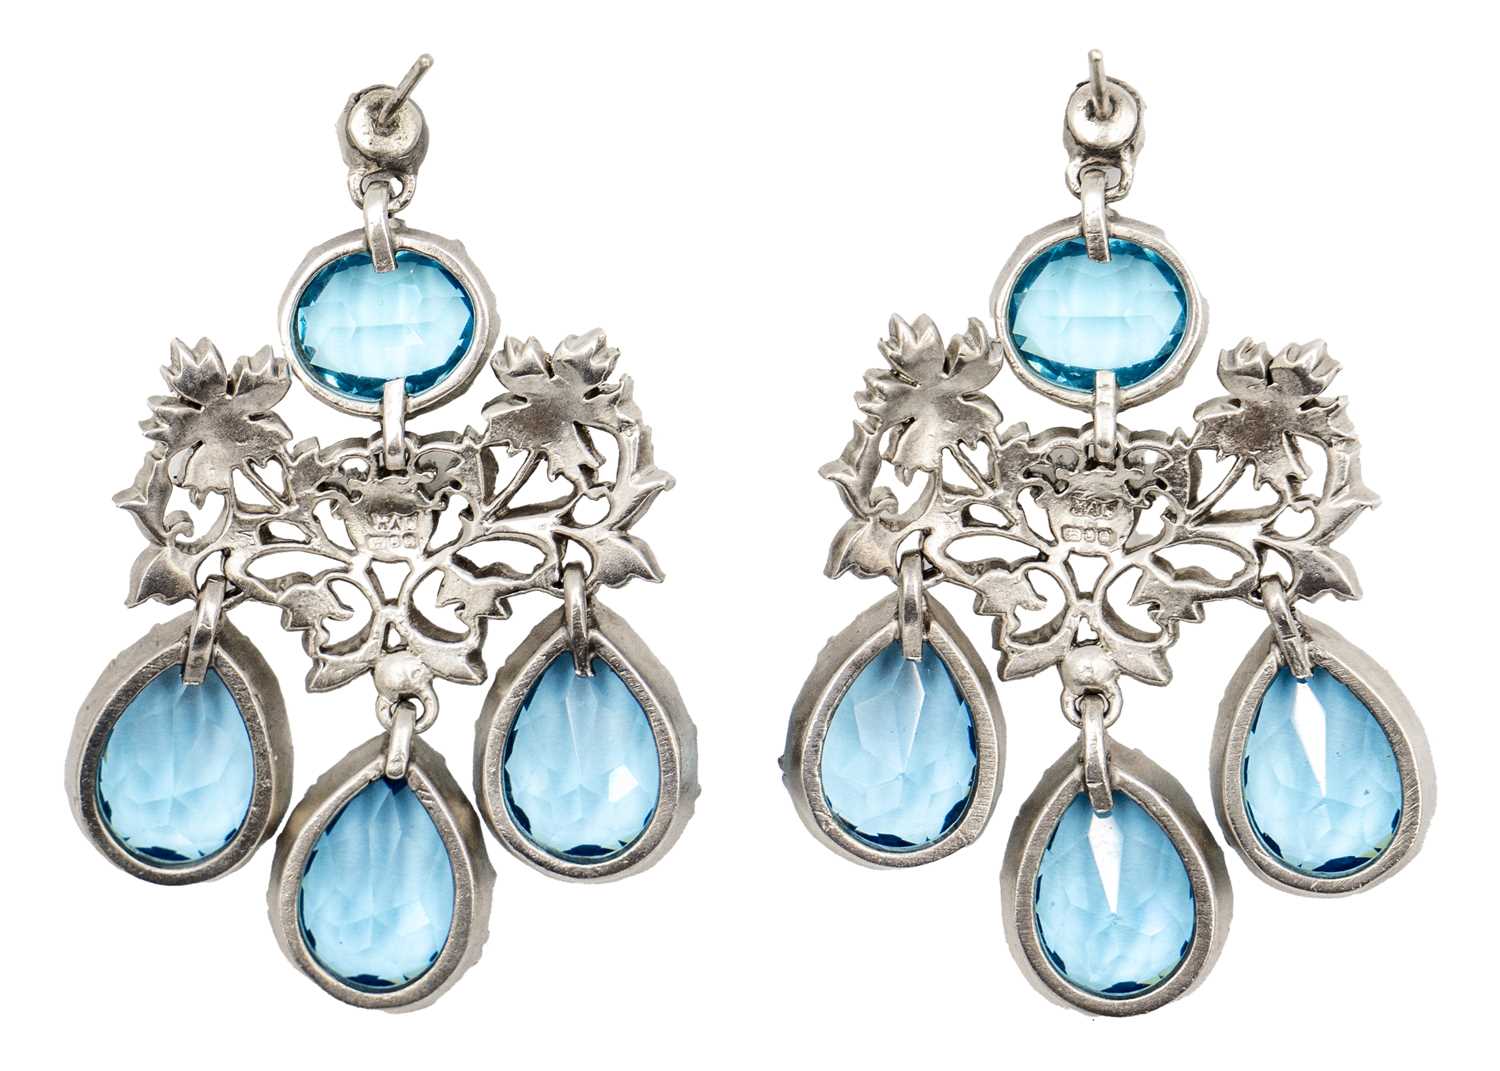 Harold A Lazarus - A pair of silver paste set chandelier earrings. - Image 2 of 3